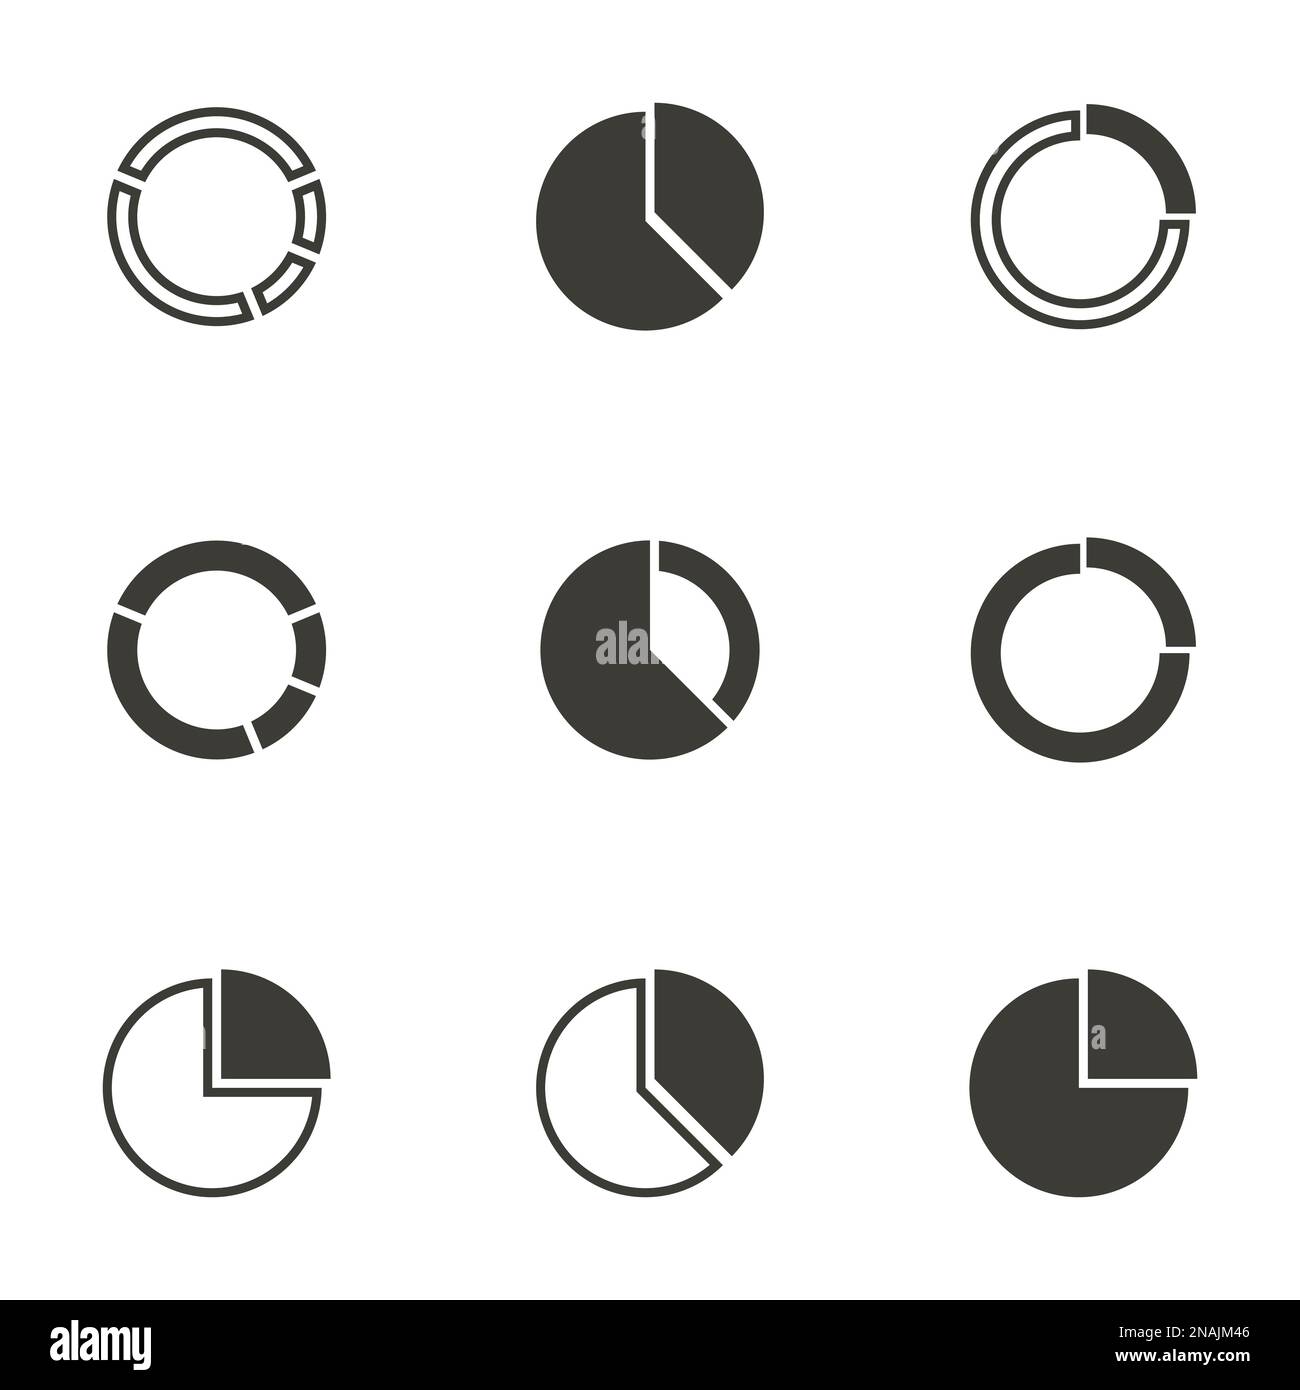 Set of objects on the theme of circle, diagram icons Stock Vector